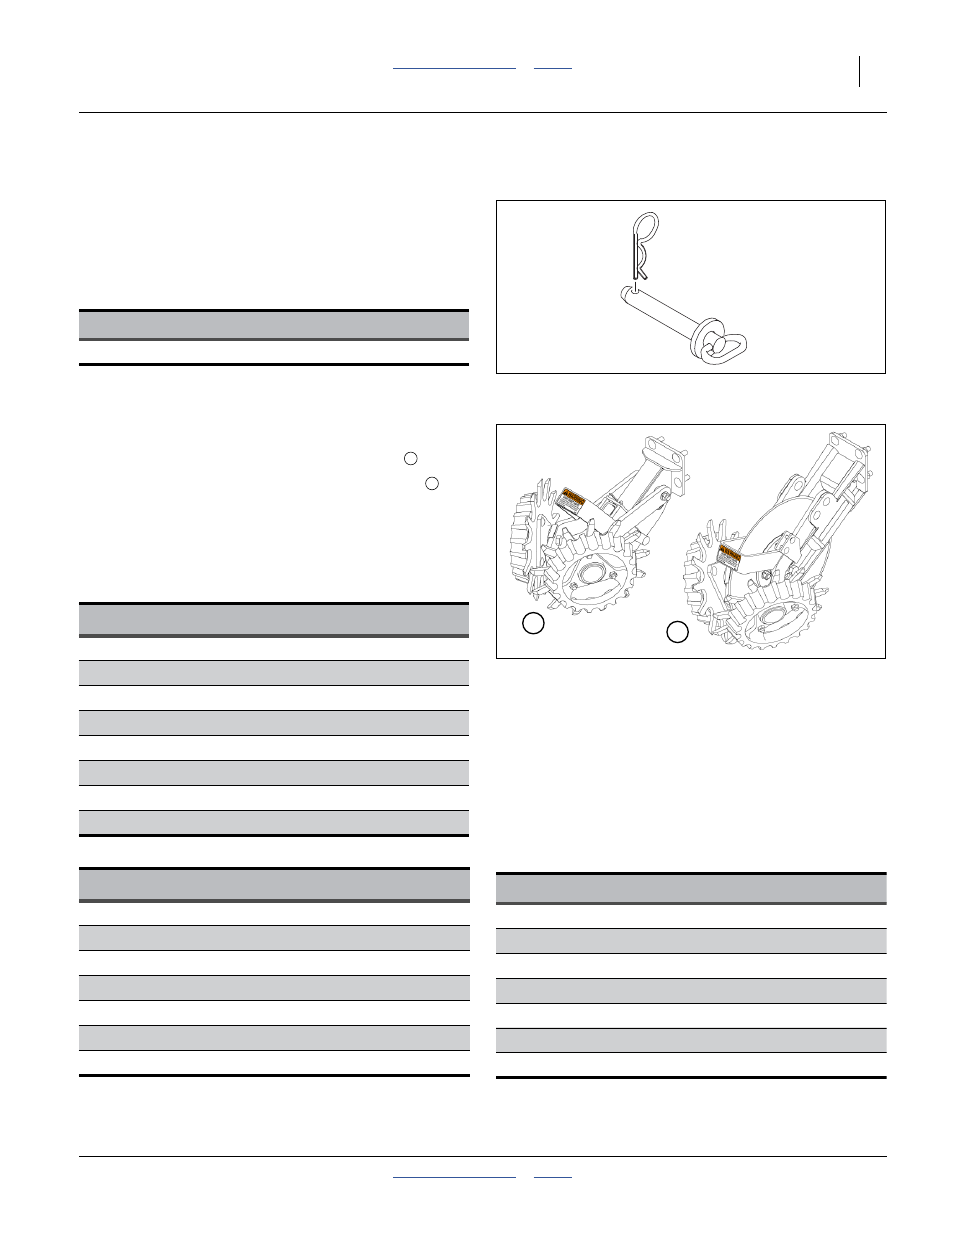 Row-mounted accessories, Lock-up pins, Rigid row cleaners | Great Plains YP825A3P Operator Manual User Manual | Page 95 / 128